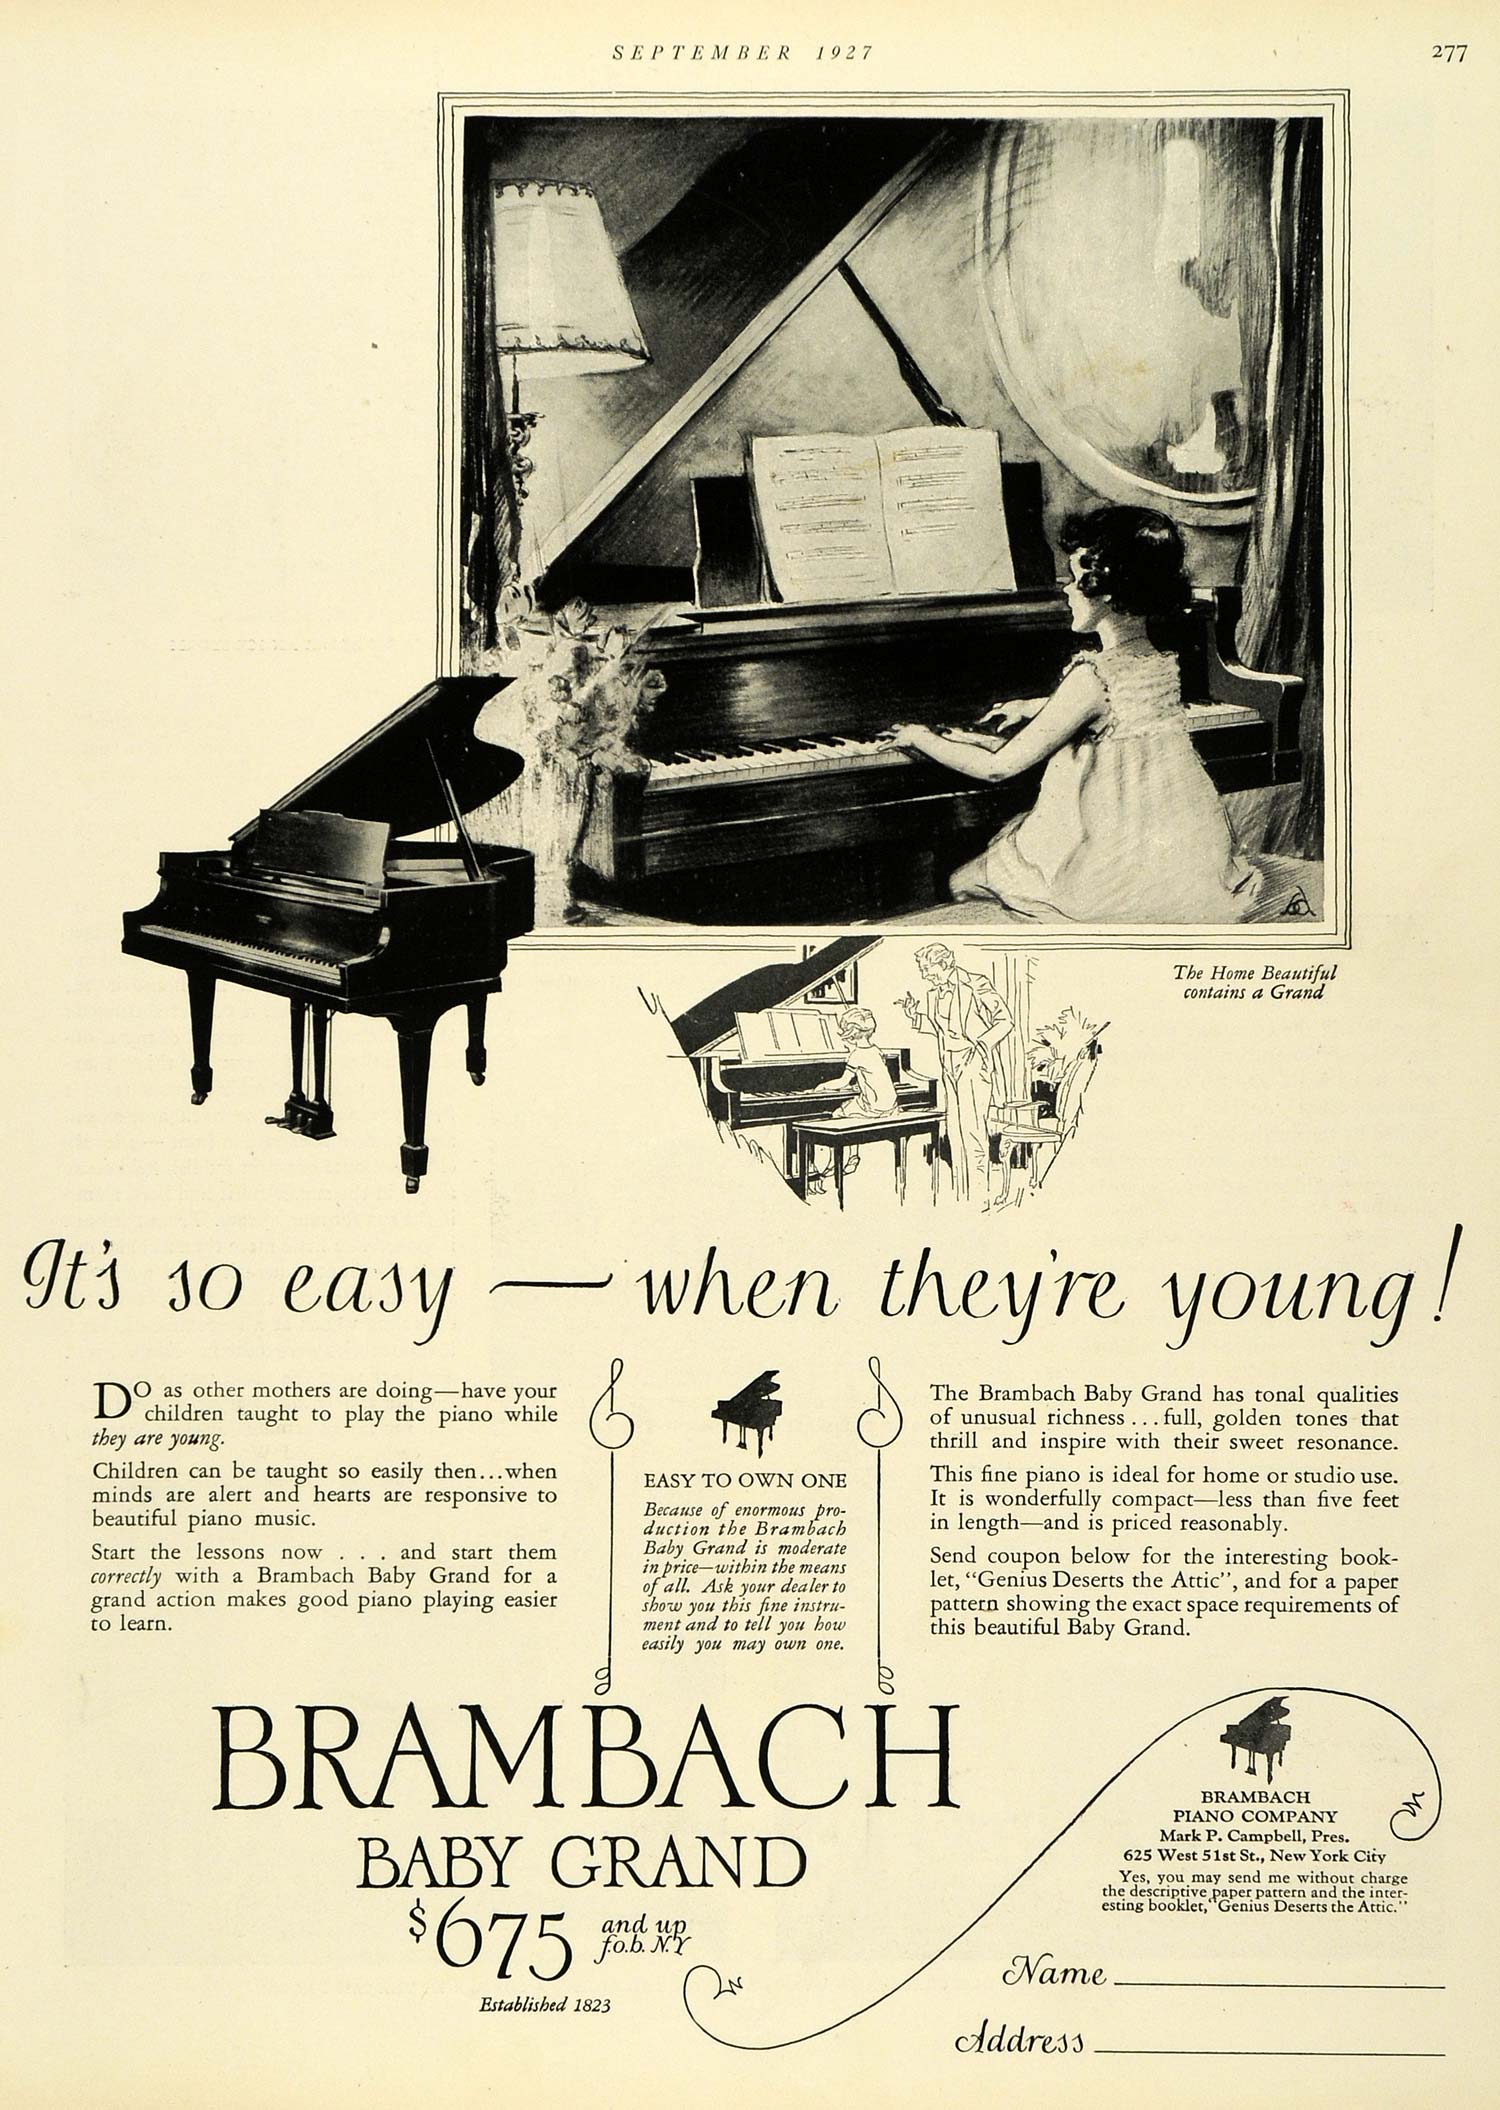 1927 Ad Brabach Baby Grand Piano Mark Campbell Musical Instrument Pianist HB2